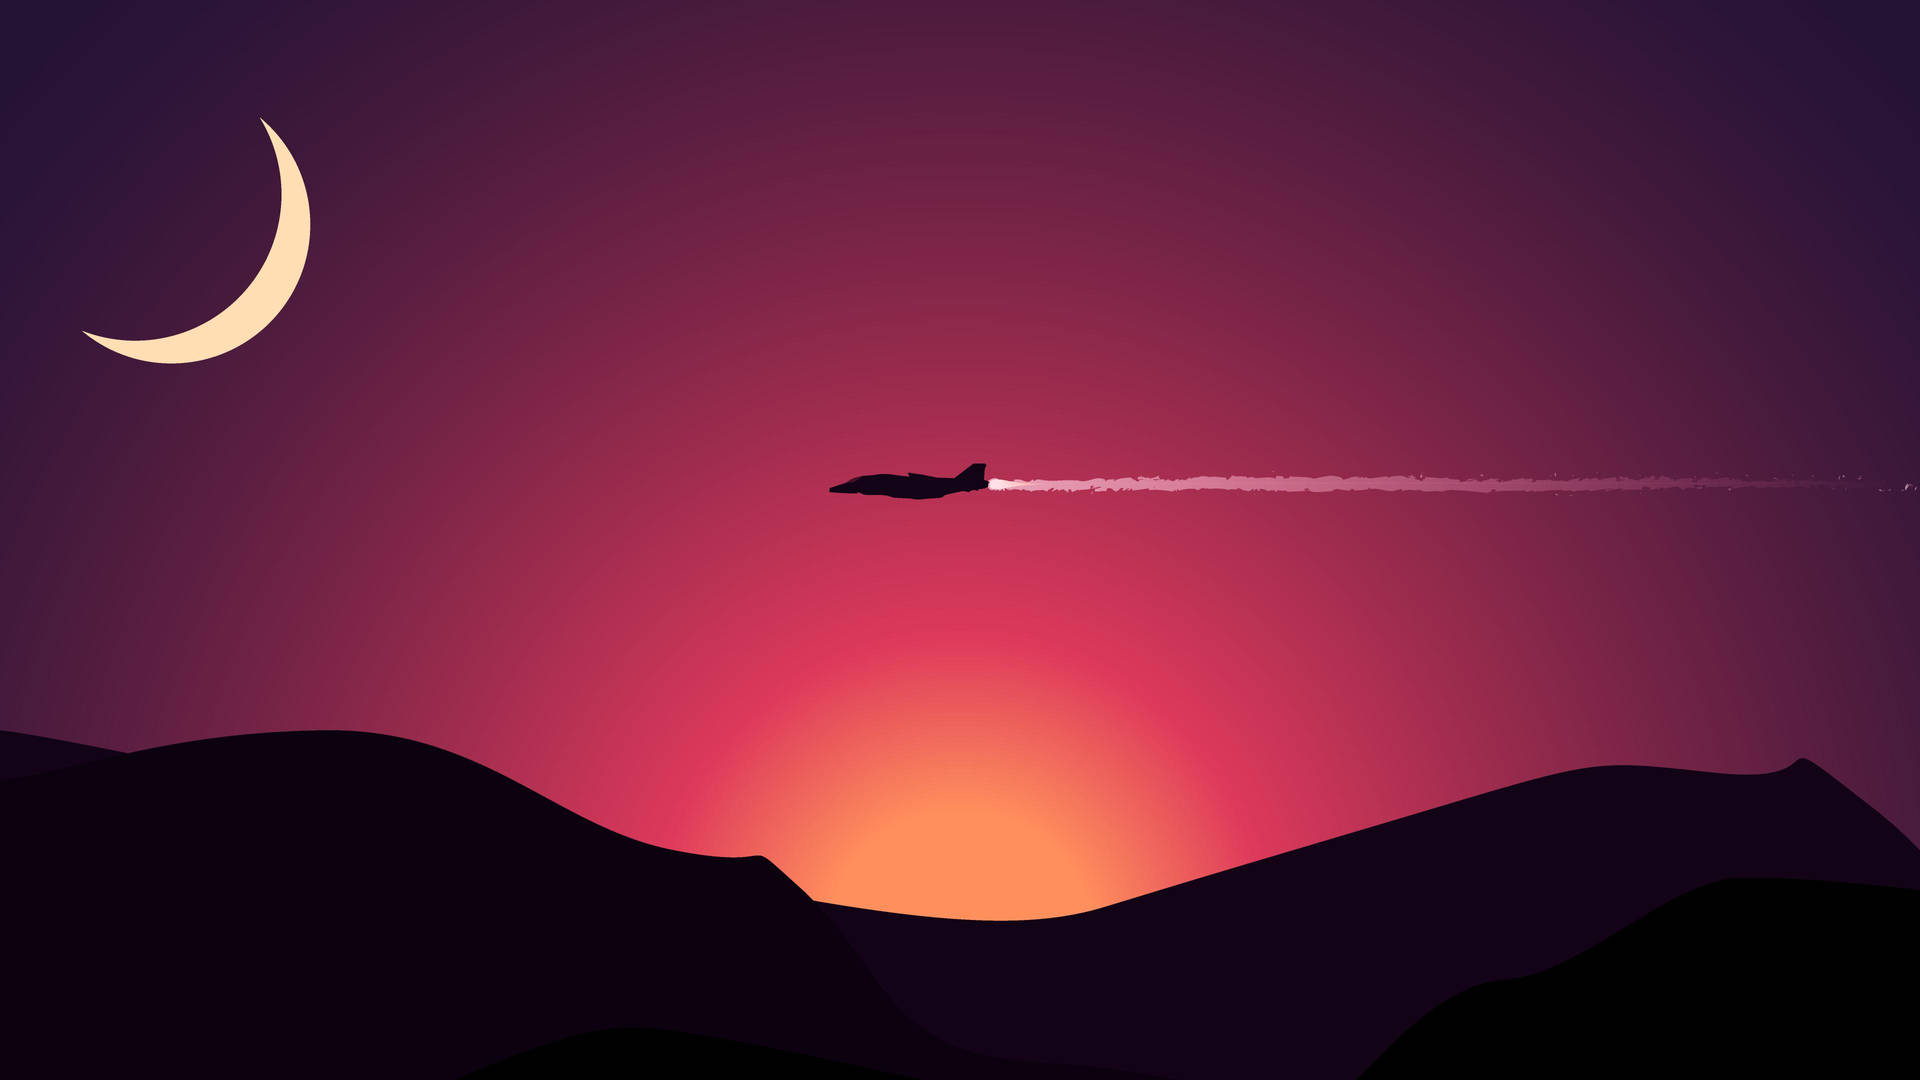 Enjoy The Beauty Of A Plane's Silhouette Against A Peaceful Sunset. Background